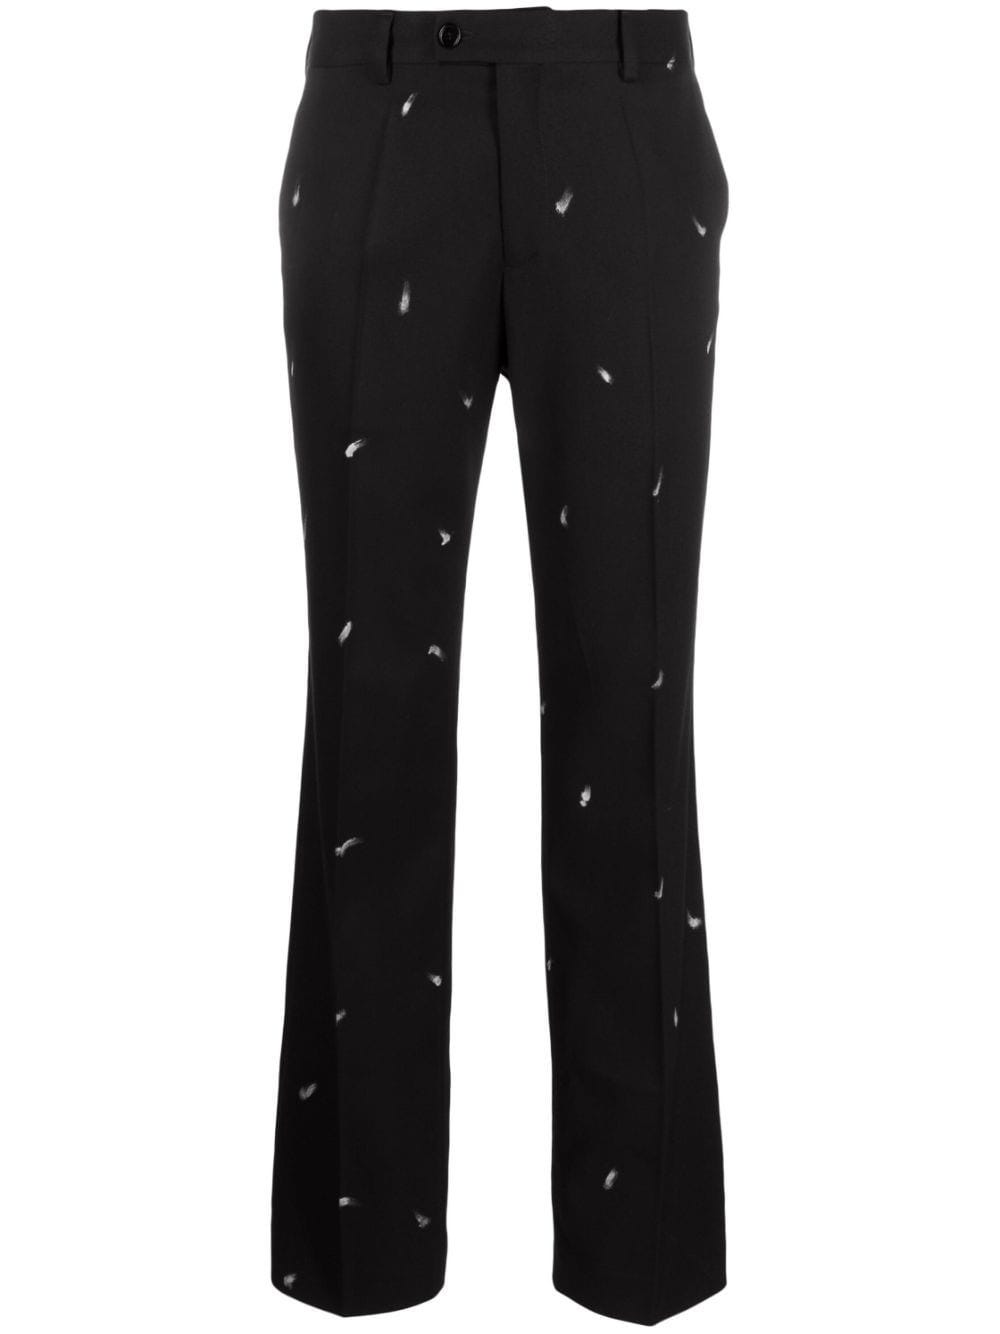 MM6 MAISON MARGIELA BLACK TAILORED TROUSERS WITH PATENT LEATHER EFFECT